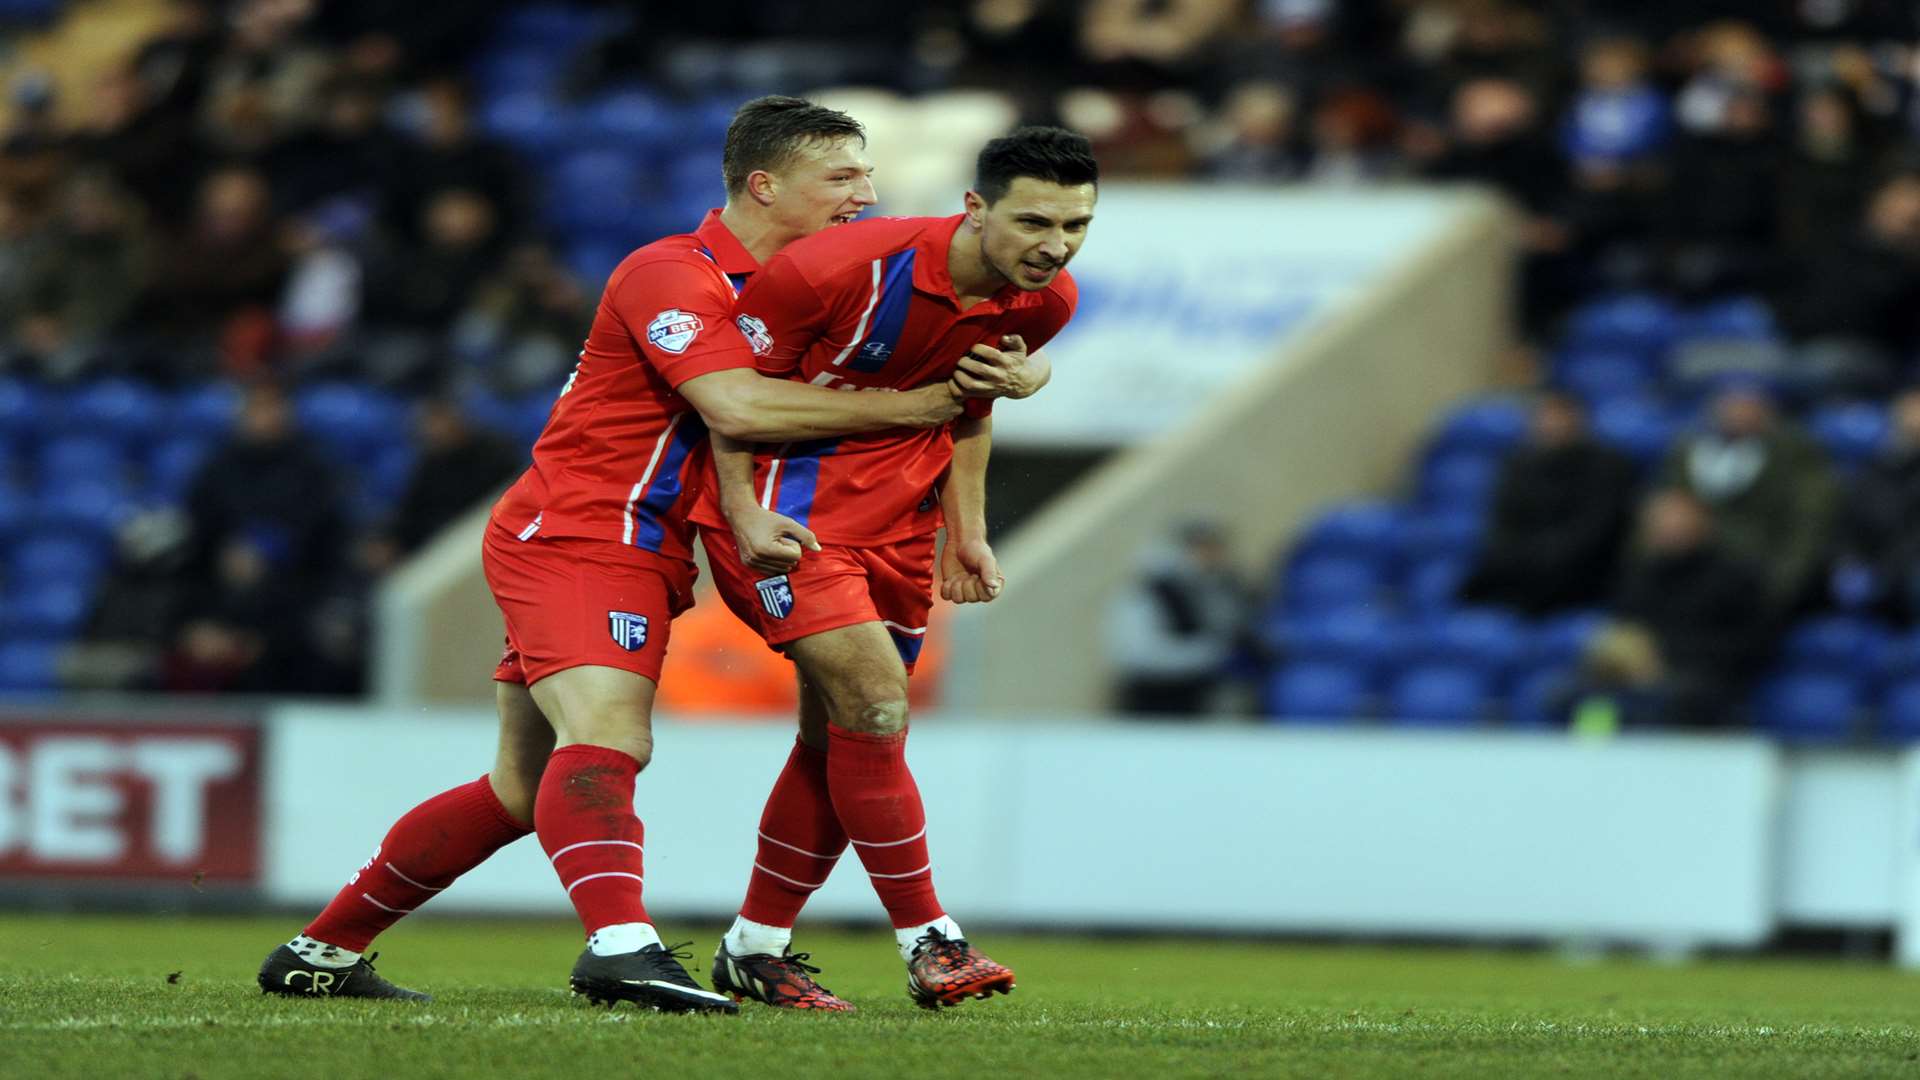 Essex-boy Joe Martin puts the Gills 1-0 up at Colchester Picture: Barry Goodwin